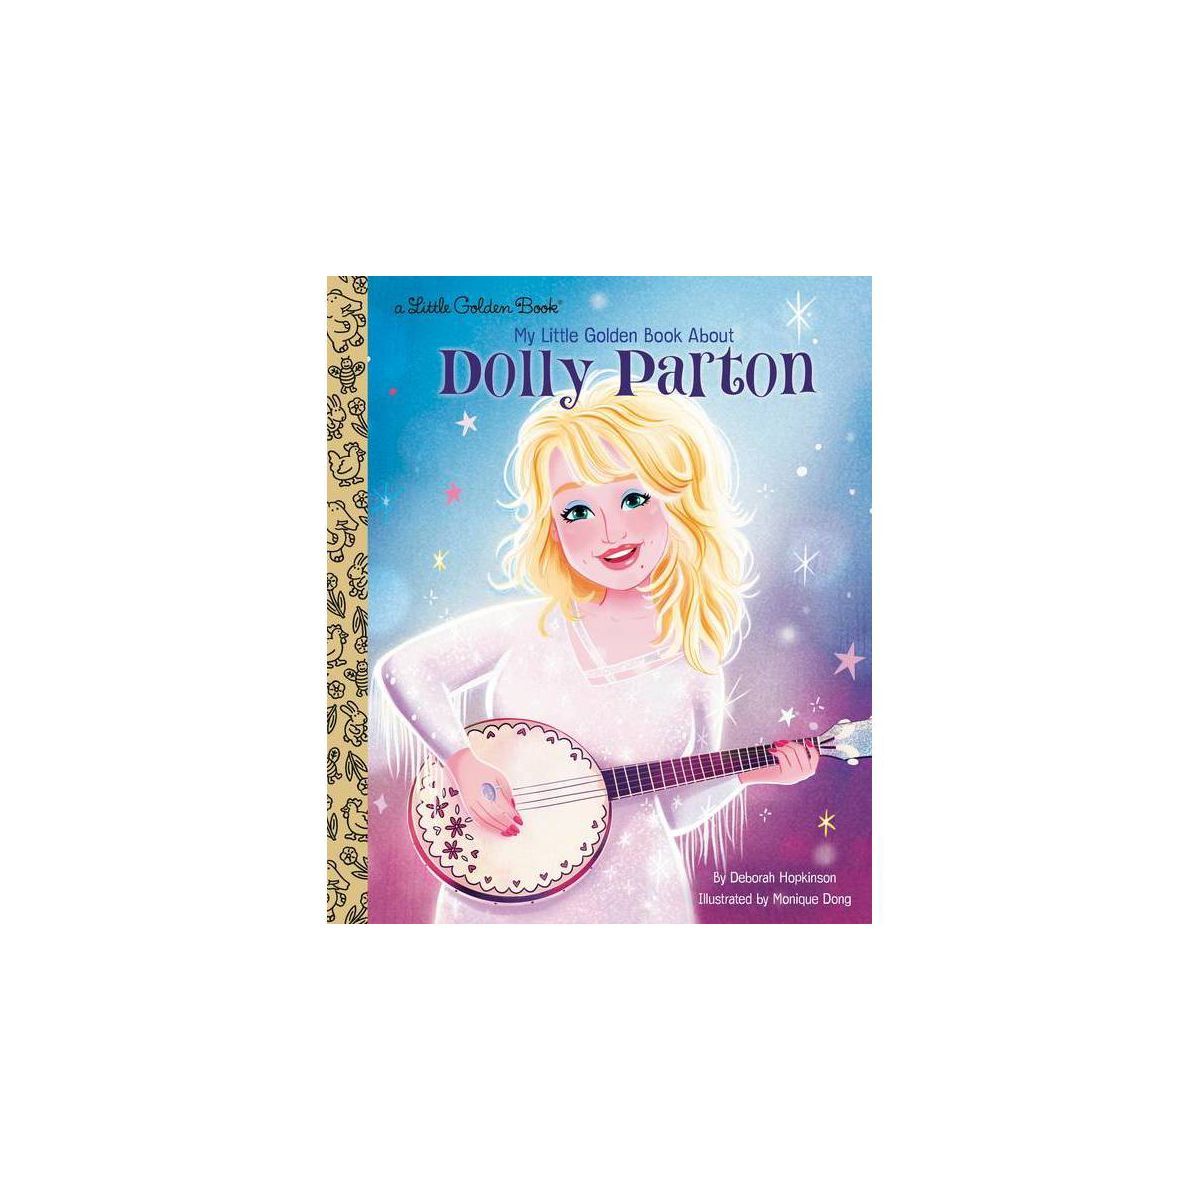 My Little Golden Book about Dolly Parton - by Deborah Hopkinson (Hardcover) | Target